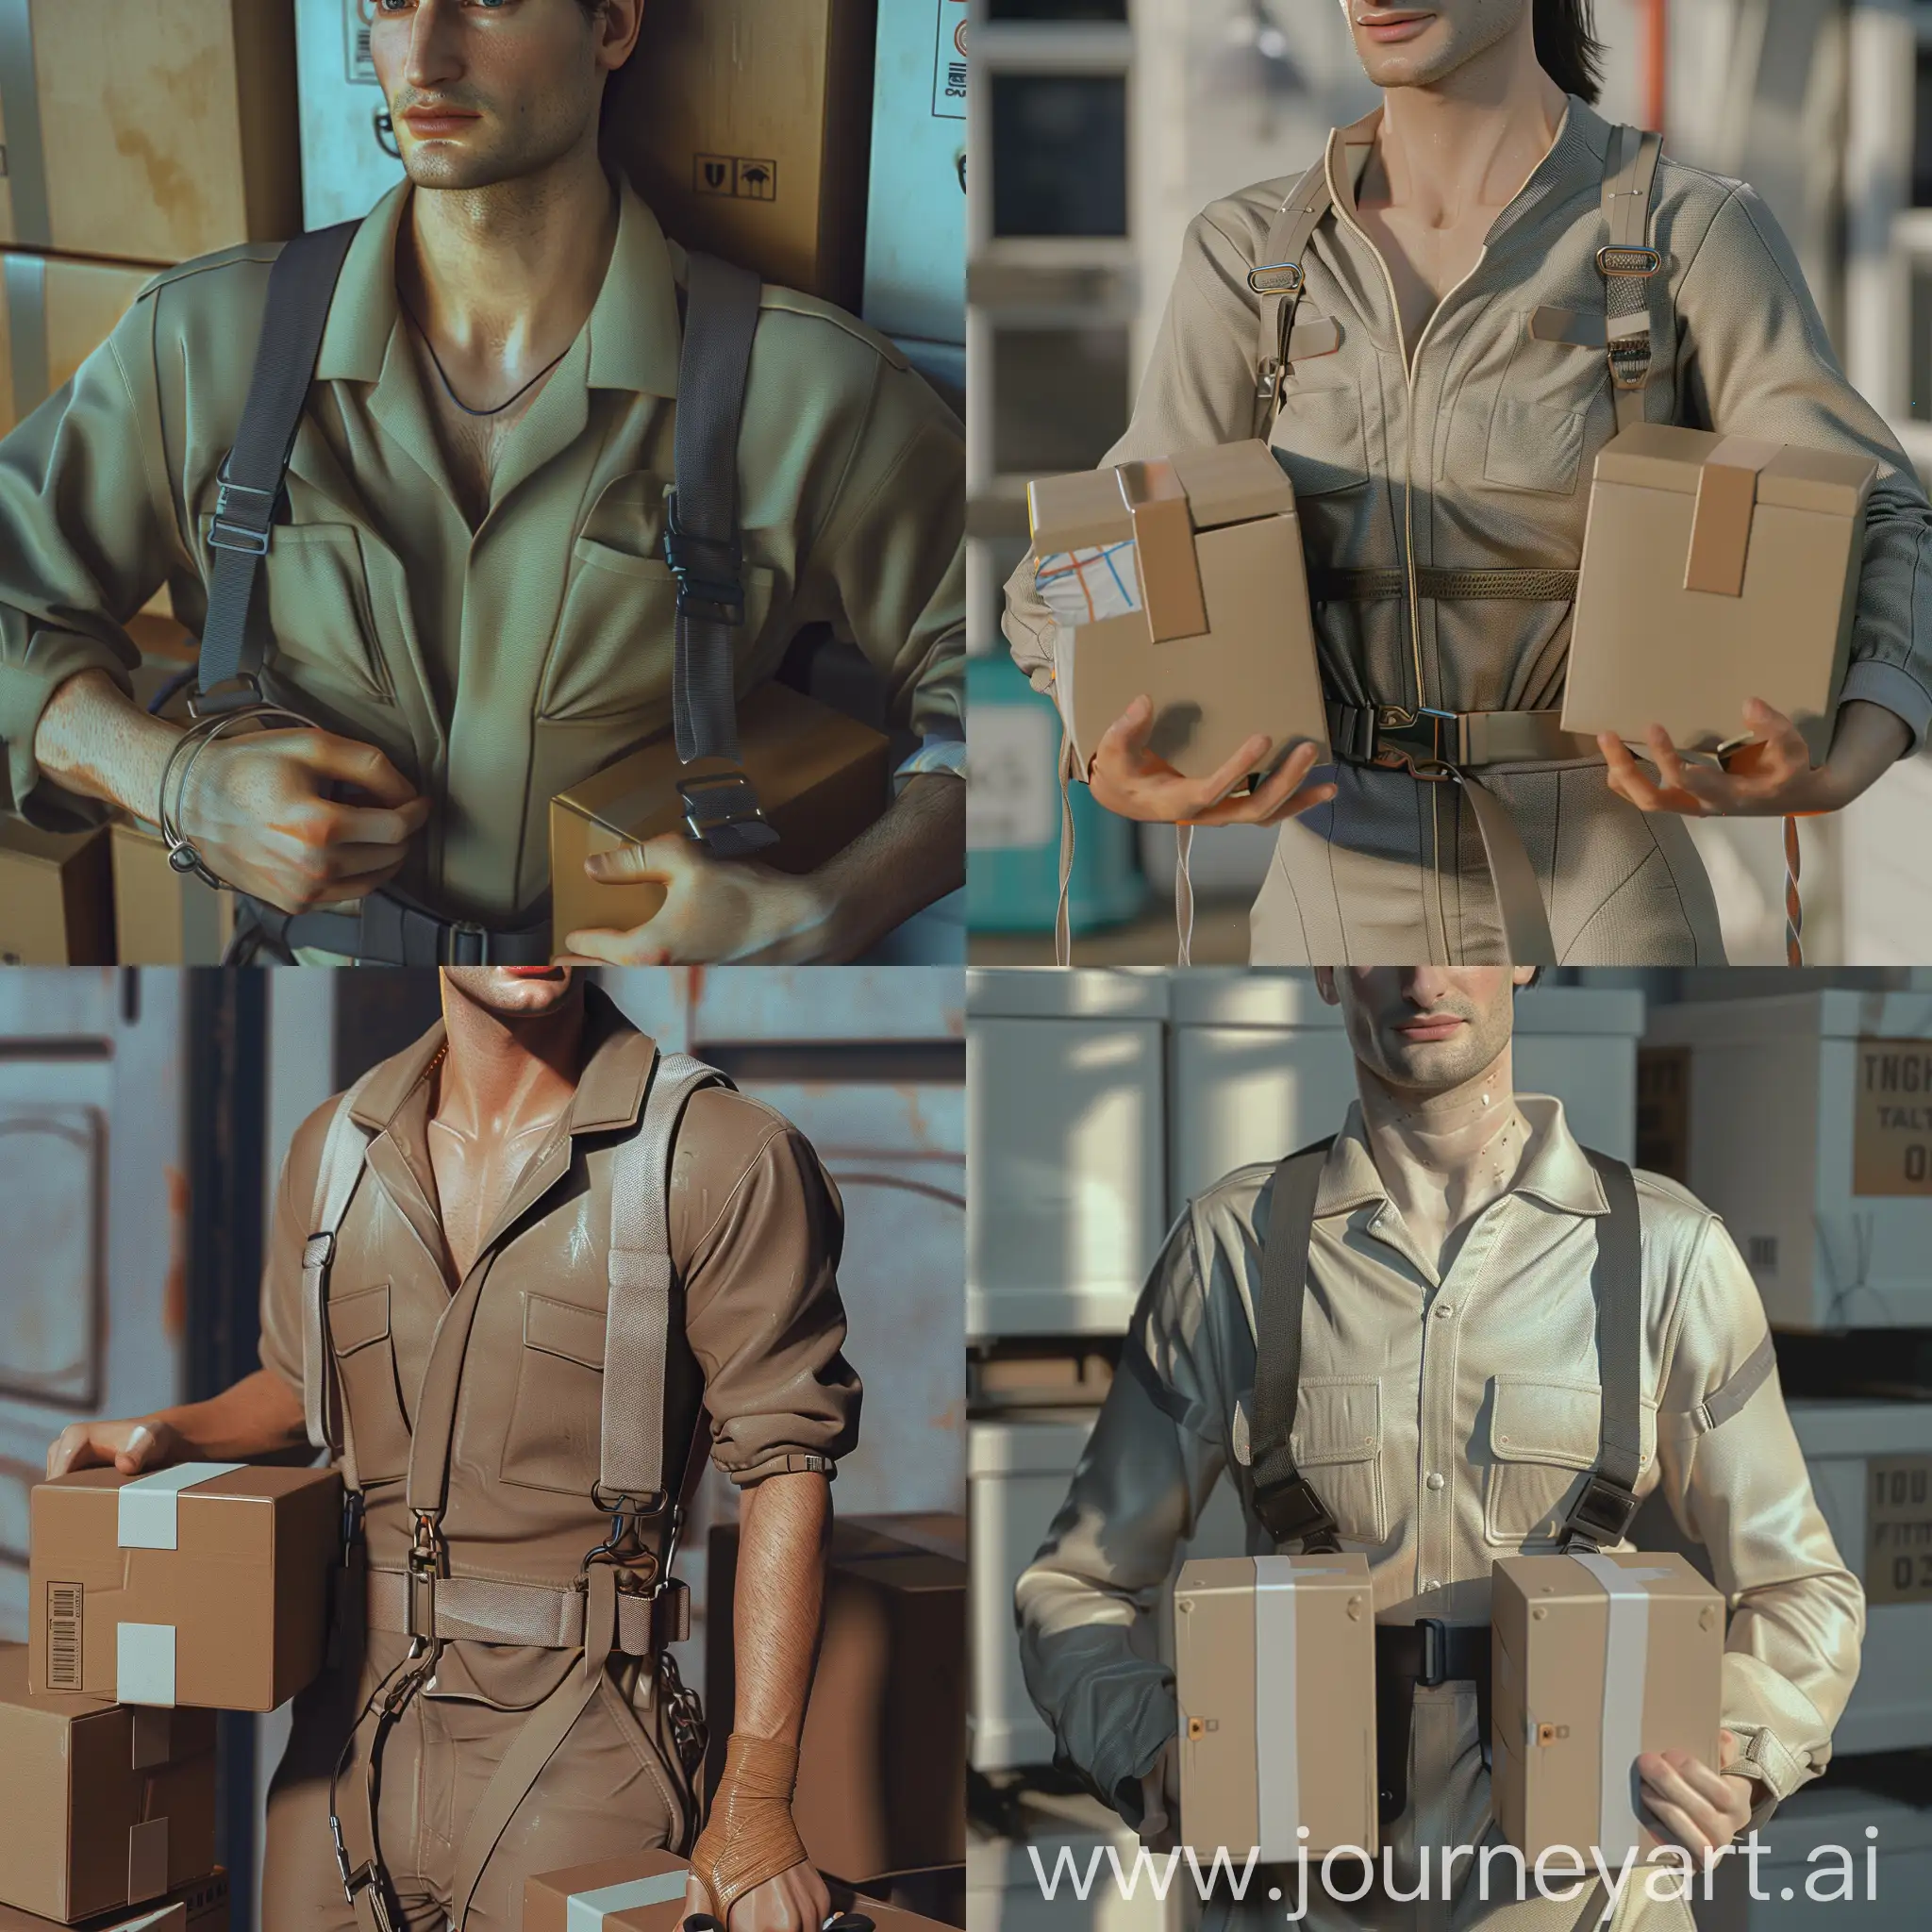 Jumpsuit-Fashion-Model-Carrying-Boxes-in-Urban-Setting